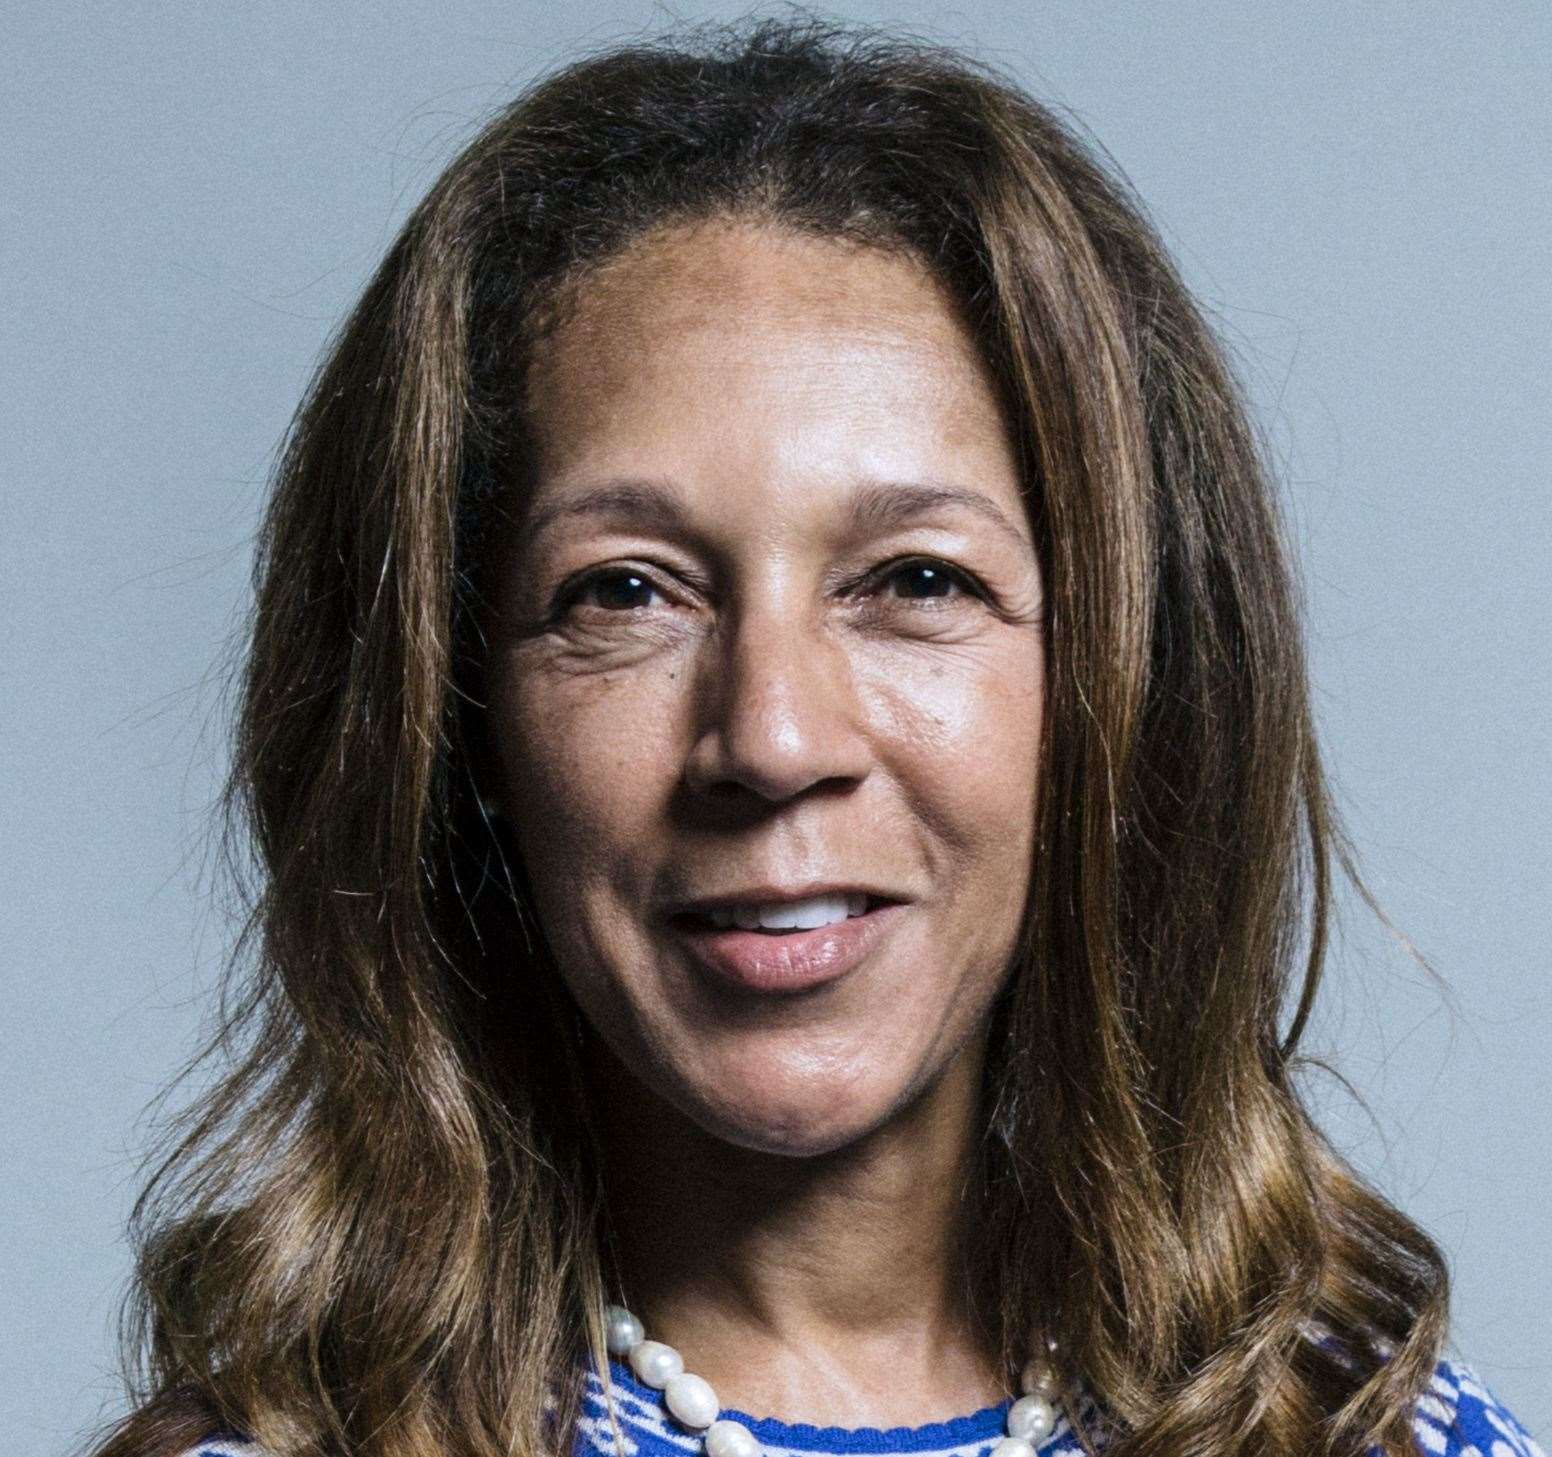 Maidstone and Weald MP Helen Grant